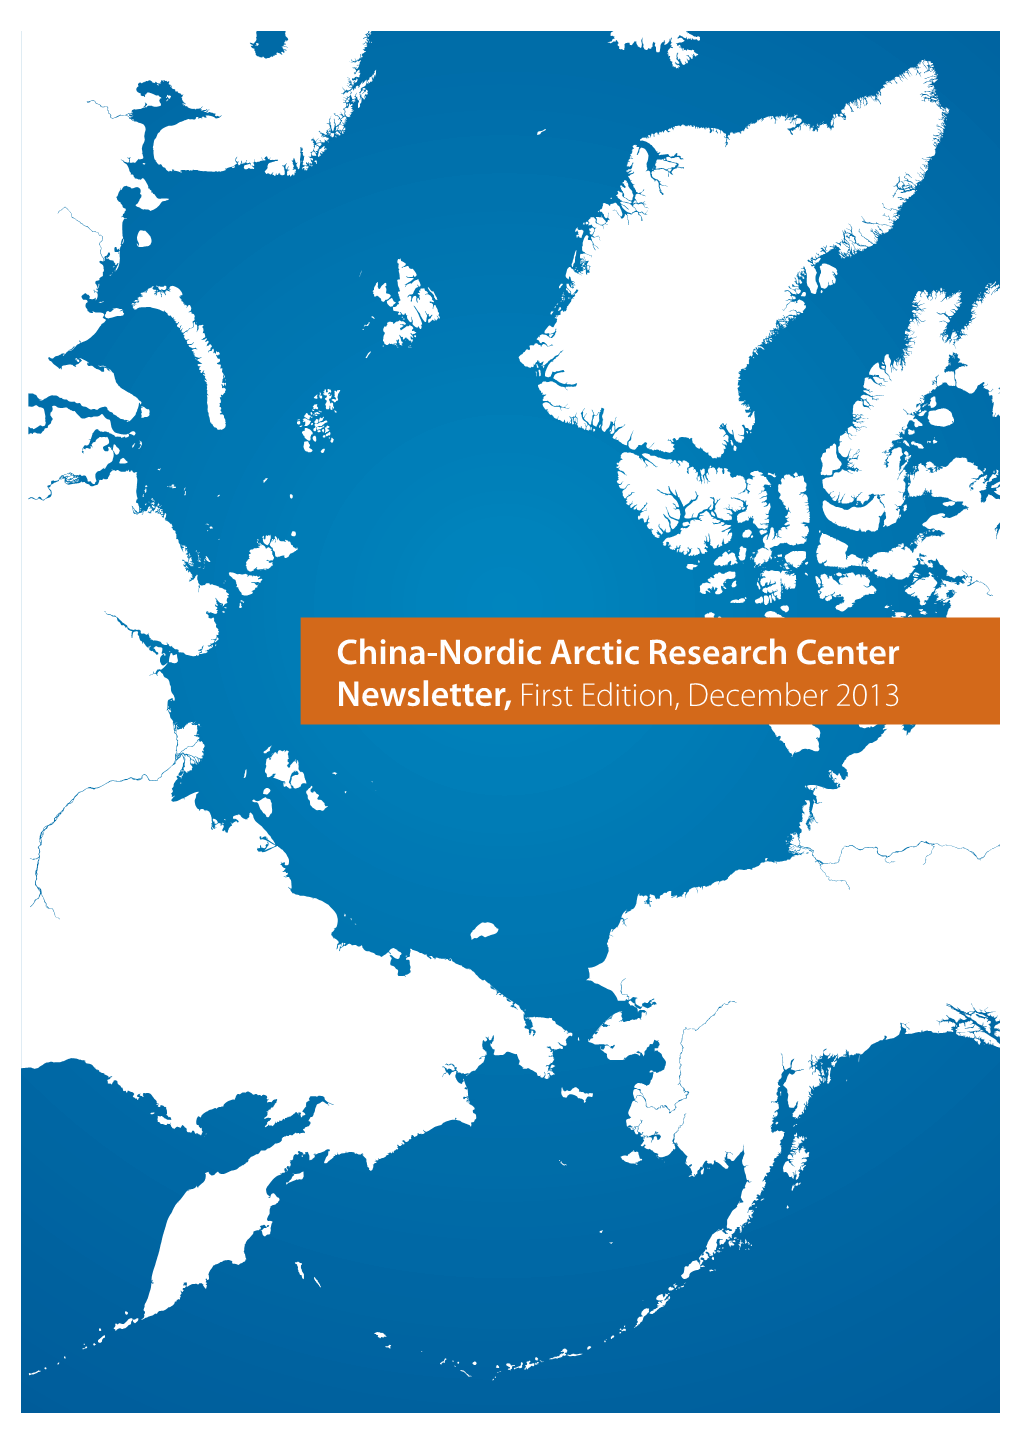 China-Nordic Arctic Research Center Newsletter, First Edition, December 2013 China-Nordic Arctic Research Center Newsletter, First Edition, December 2013 Content